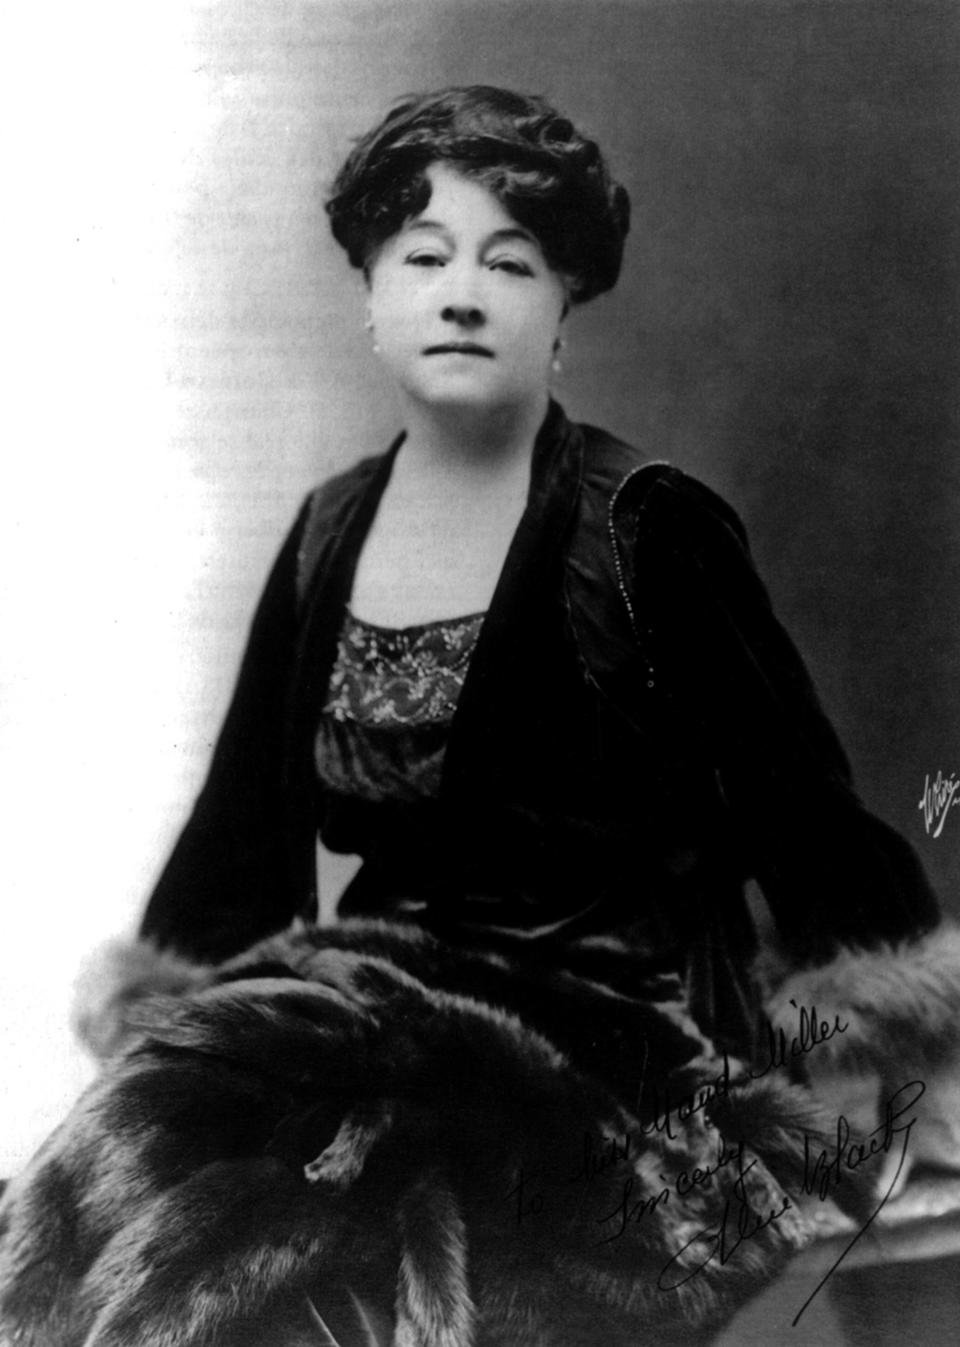 Alice Guy made over 100 films in the early 1900s before marrying the manager of the production studio she worked for, a man named Herbert Blach&eacute;. She became the first female film studio owner opening Solax Studios in 1910. <br /><br /><a href="https://broadly.vice.com/en_us/article/the-forgotten-revolutionary-filmmaker-whose-name-was-replaced-by-her-husbands" target="_blank">According to Broadly</a>, Guy was reversing gender roles on screen decades before the term &ldquo;gender role&rdquo; entered the lexicon. In one film, she imagined &ldquo;a world in which women flourished in traditionally male roles while men writhed under oppression.&rdquo;<br /><br />Ironically, her name would eventually be erased and her husband would get the credit for her visionary work in film. He opened a studio after she did, convinced her to merge companies and to let his name be at the forefront. <br /><br />According to Broadly: "In 1920, author Carolyn Lowrey published <a href="https://archive.org/details/firstonehundred00lowrgoog"><strong><i>The First One Hundred Noted Men and Women of the Screen</i></strong></a> and dedicated a page to Herbert Blach&eacute;'s legacy, making no mention of Guy. Lowrey <i>did</i> so kindly mention a few of her films &mdash; she just falsely credited them to Blach&eacute;."